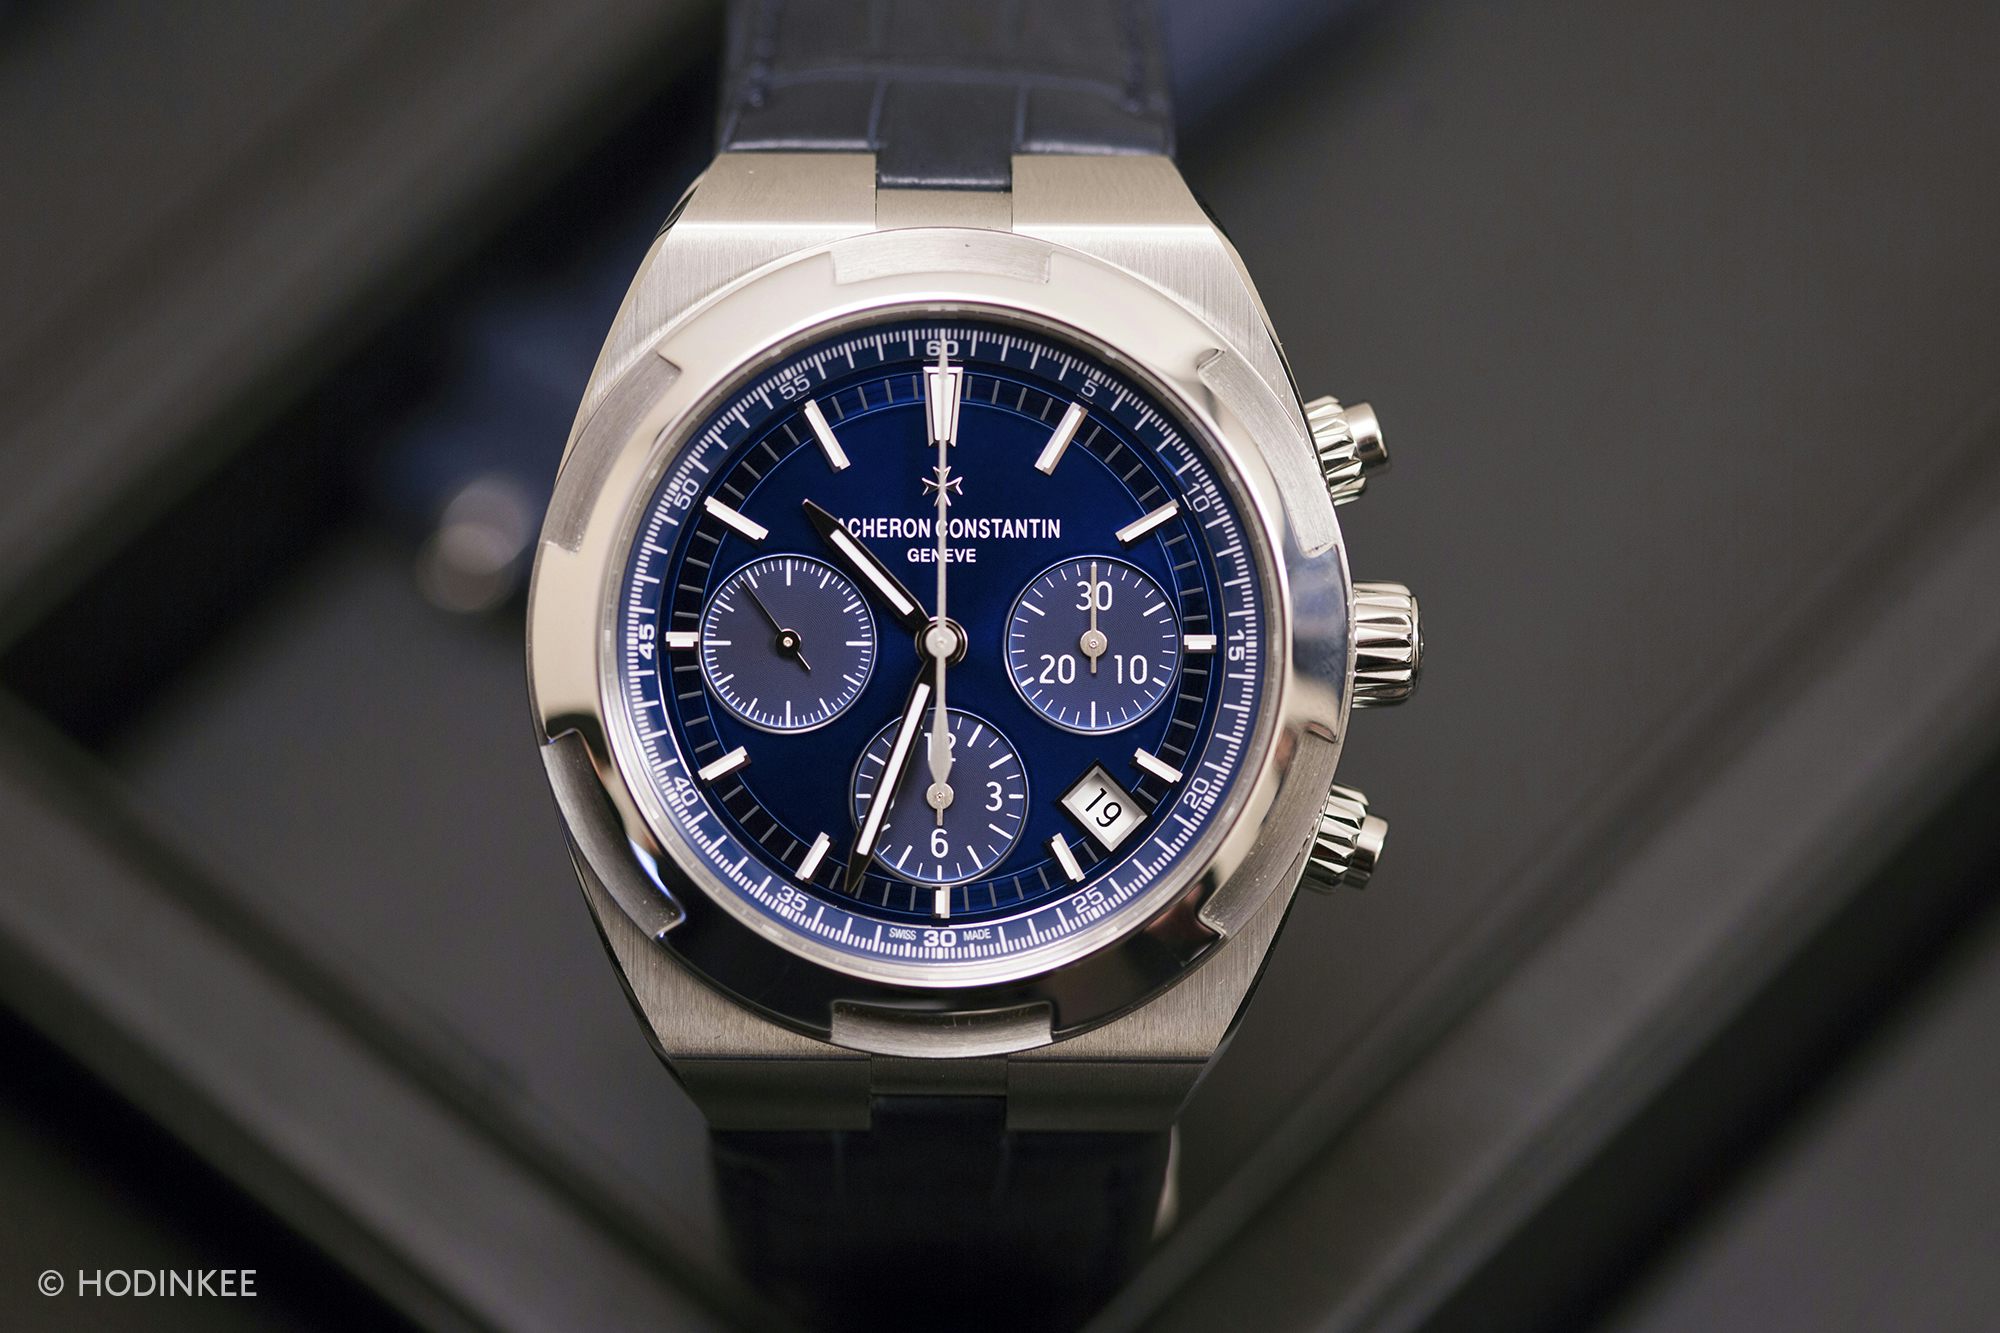 Hands-On with the Vacheron Constantin Overseas Chronograph Ref